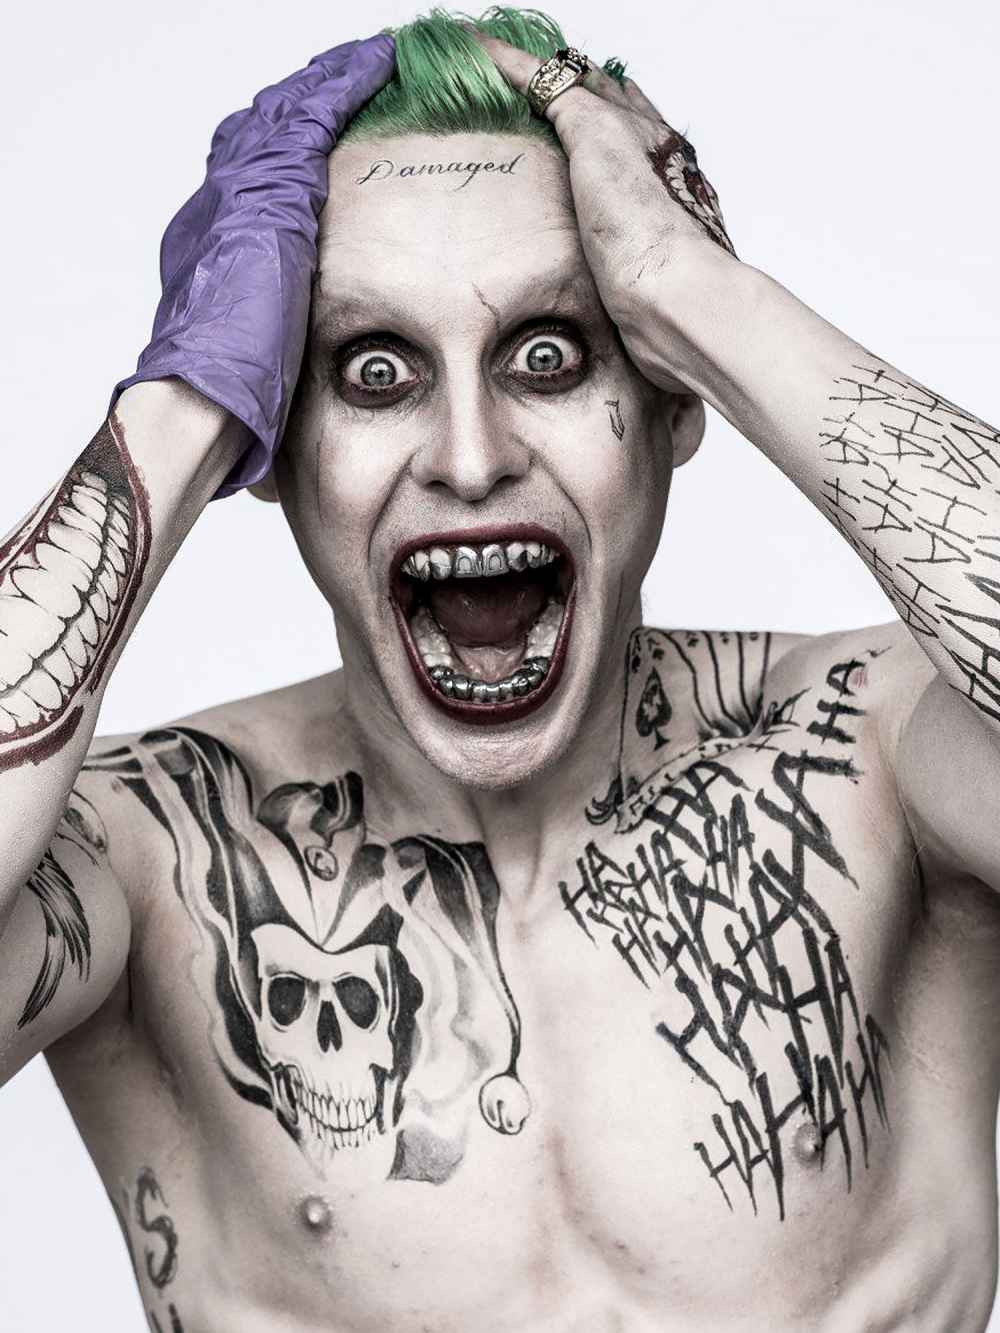 Jared Leto Didn't 'Cross Any Lines' With Gifts for 'Suicide Squad' Costars